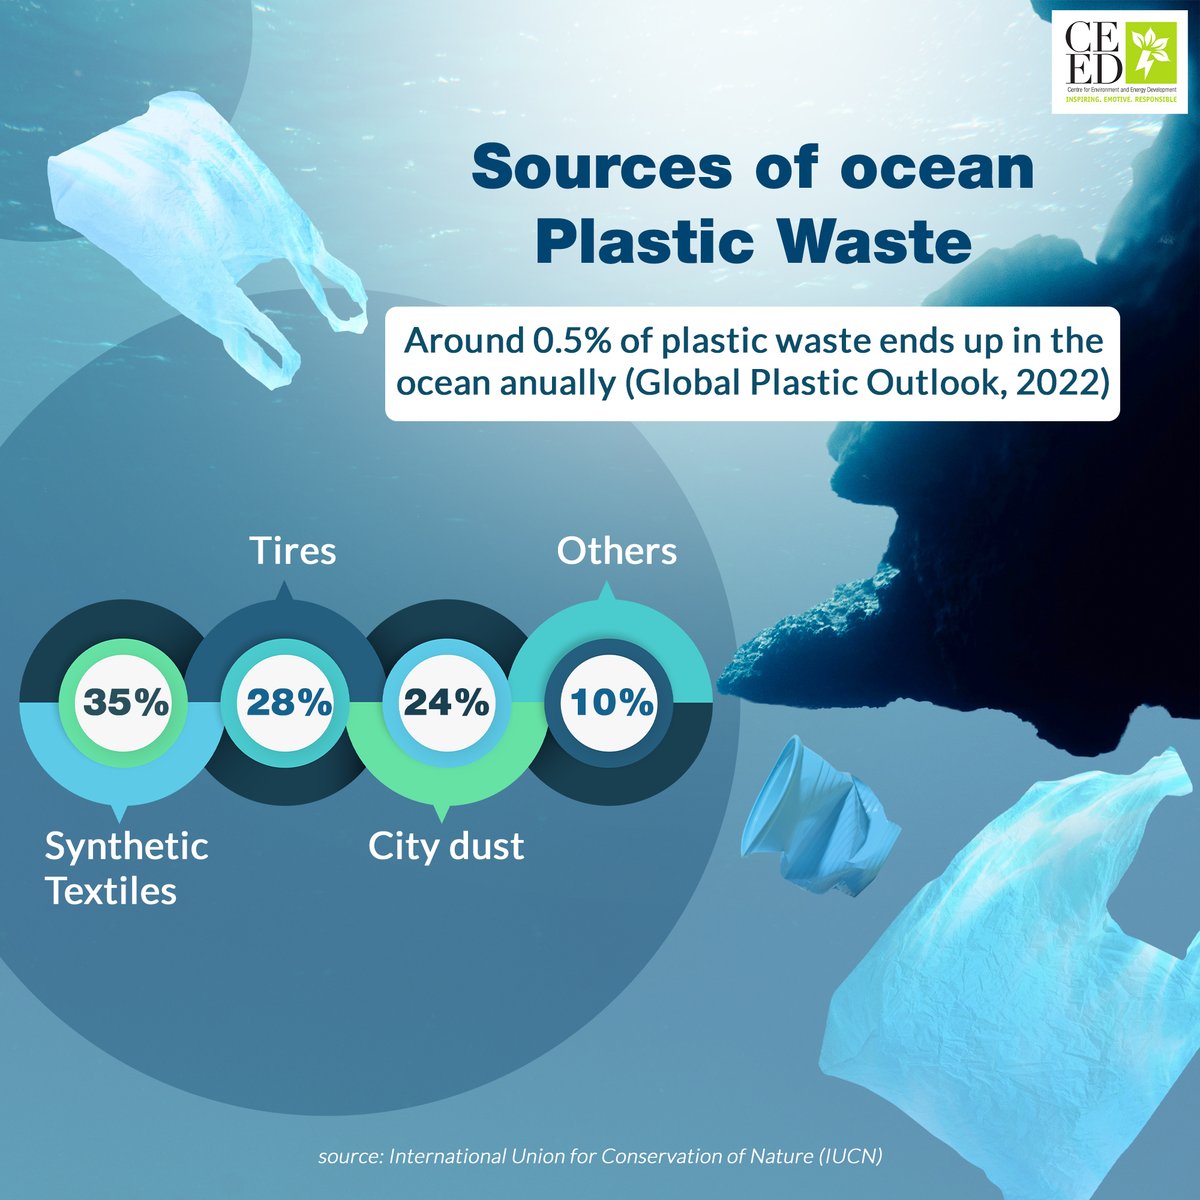 Explore the key sources behind the global issue of ocean plastic pollution! Together, let's raise awareness and take action to protect our oceans this #WorldEarthDay. #PlasticPollution #Oceans #OceanPollution #waste #Earth #Environment #planet